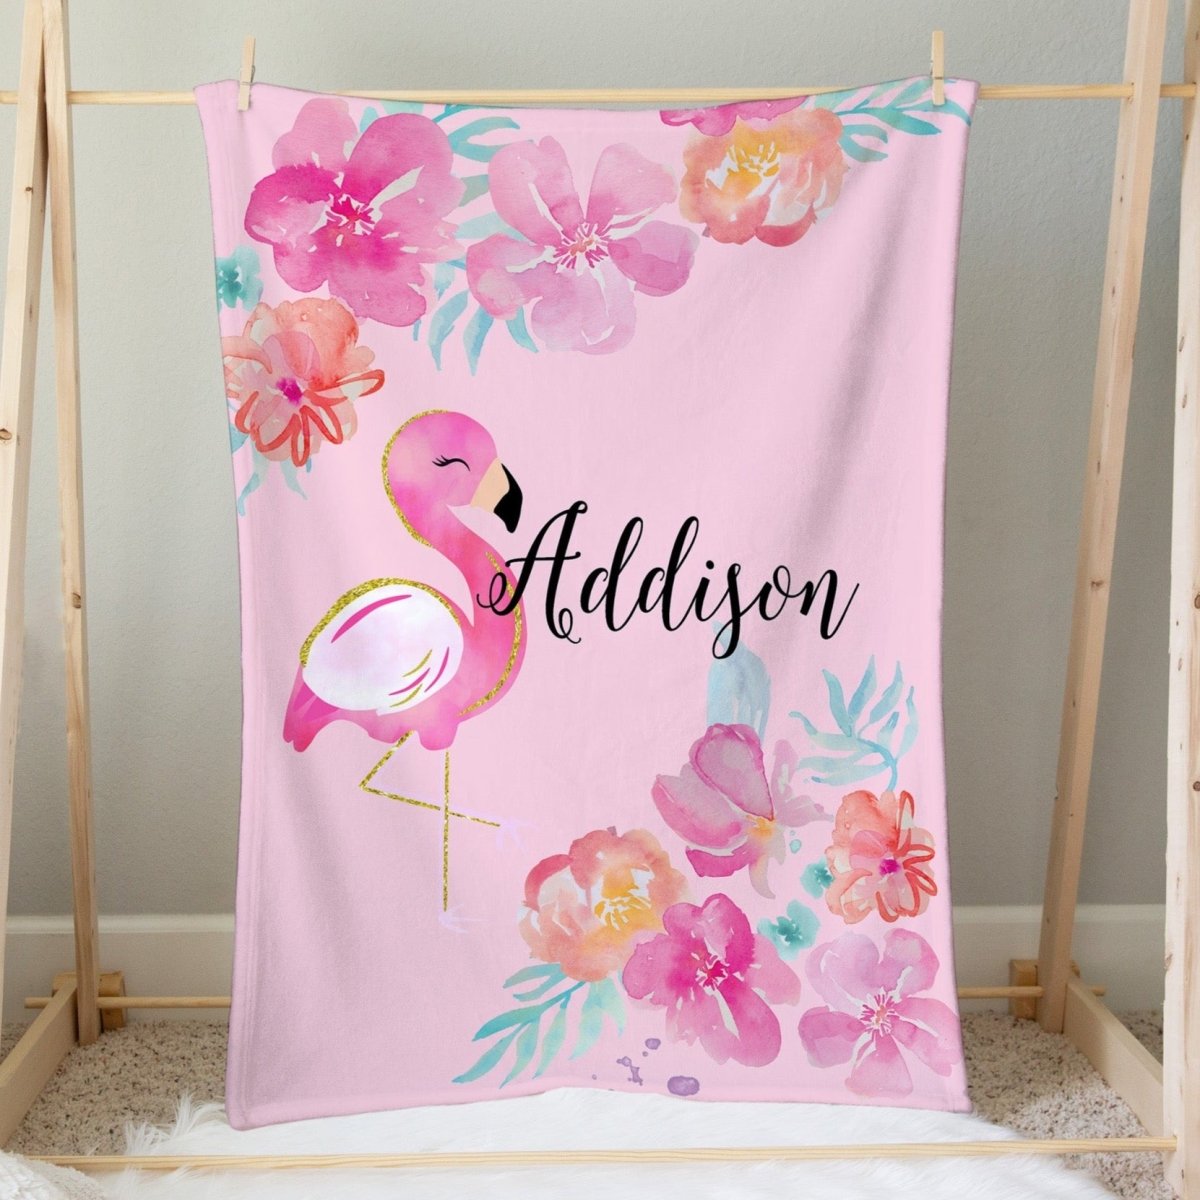 Tropical Flamingo Personalized Minky Blanket - gender_girl, Personalized_Yes, text